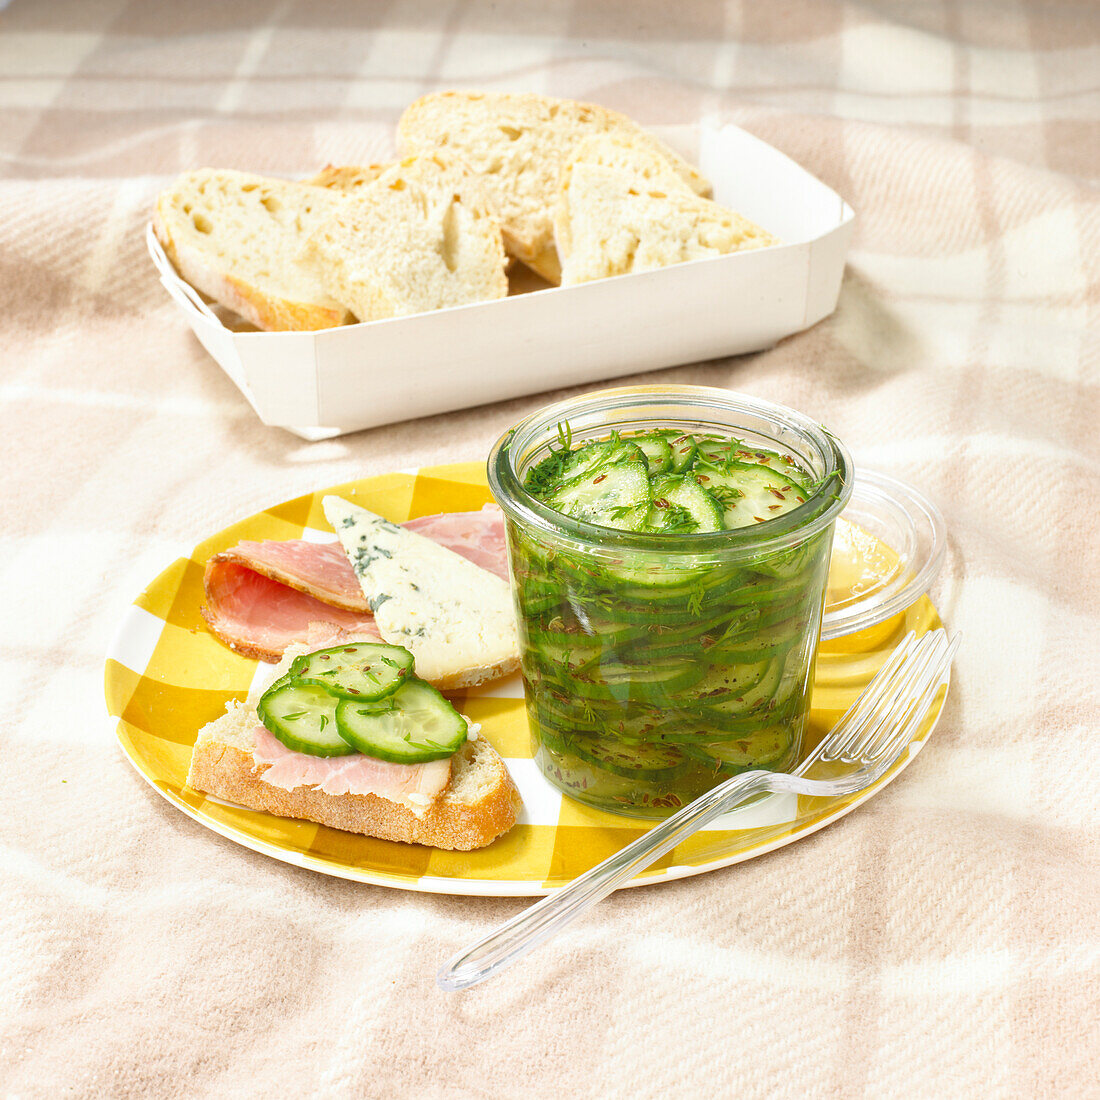 Ham and sliced bread and jar of cucumber and dill pickle